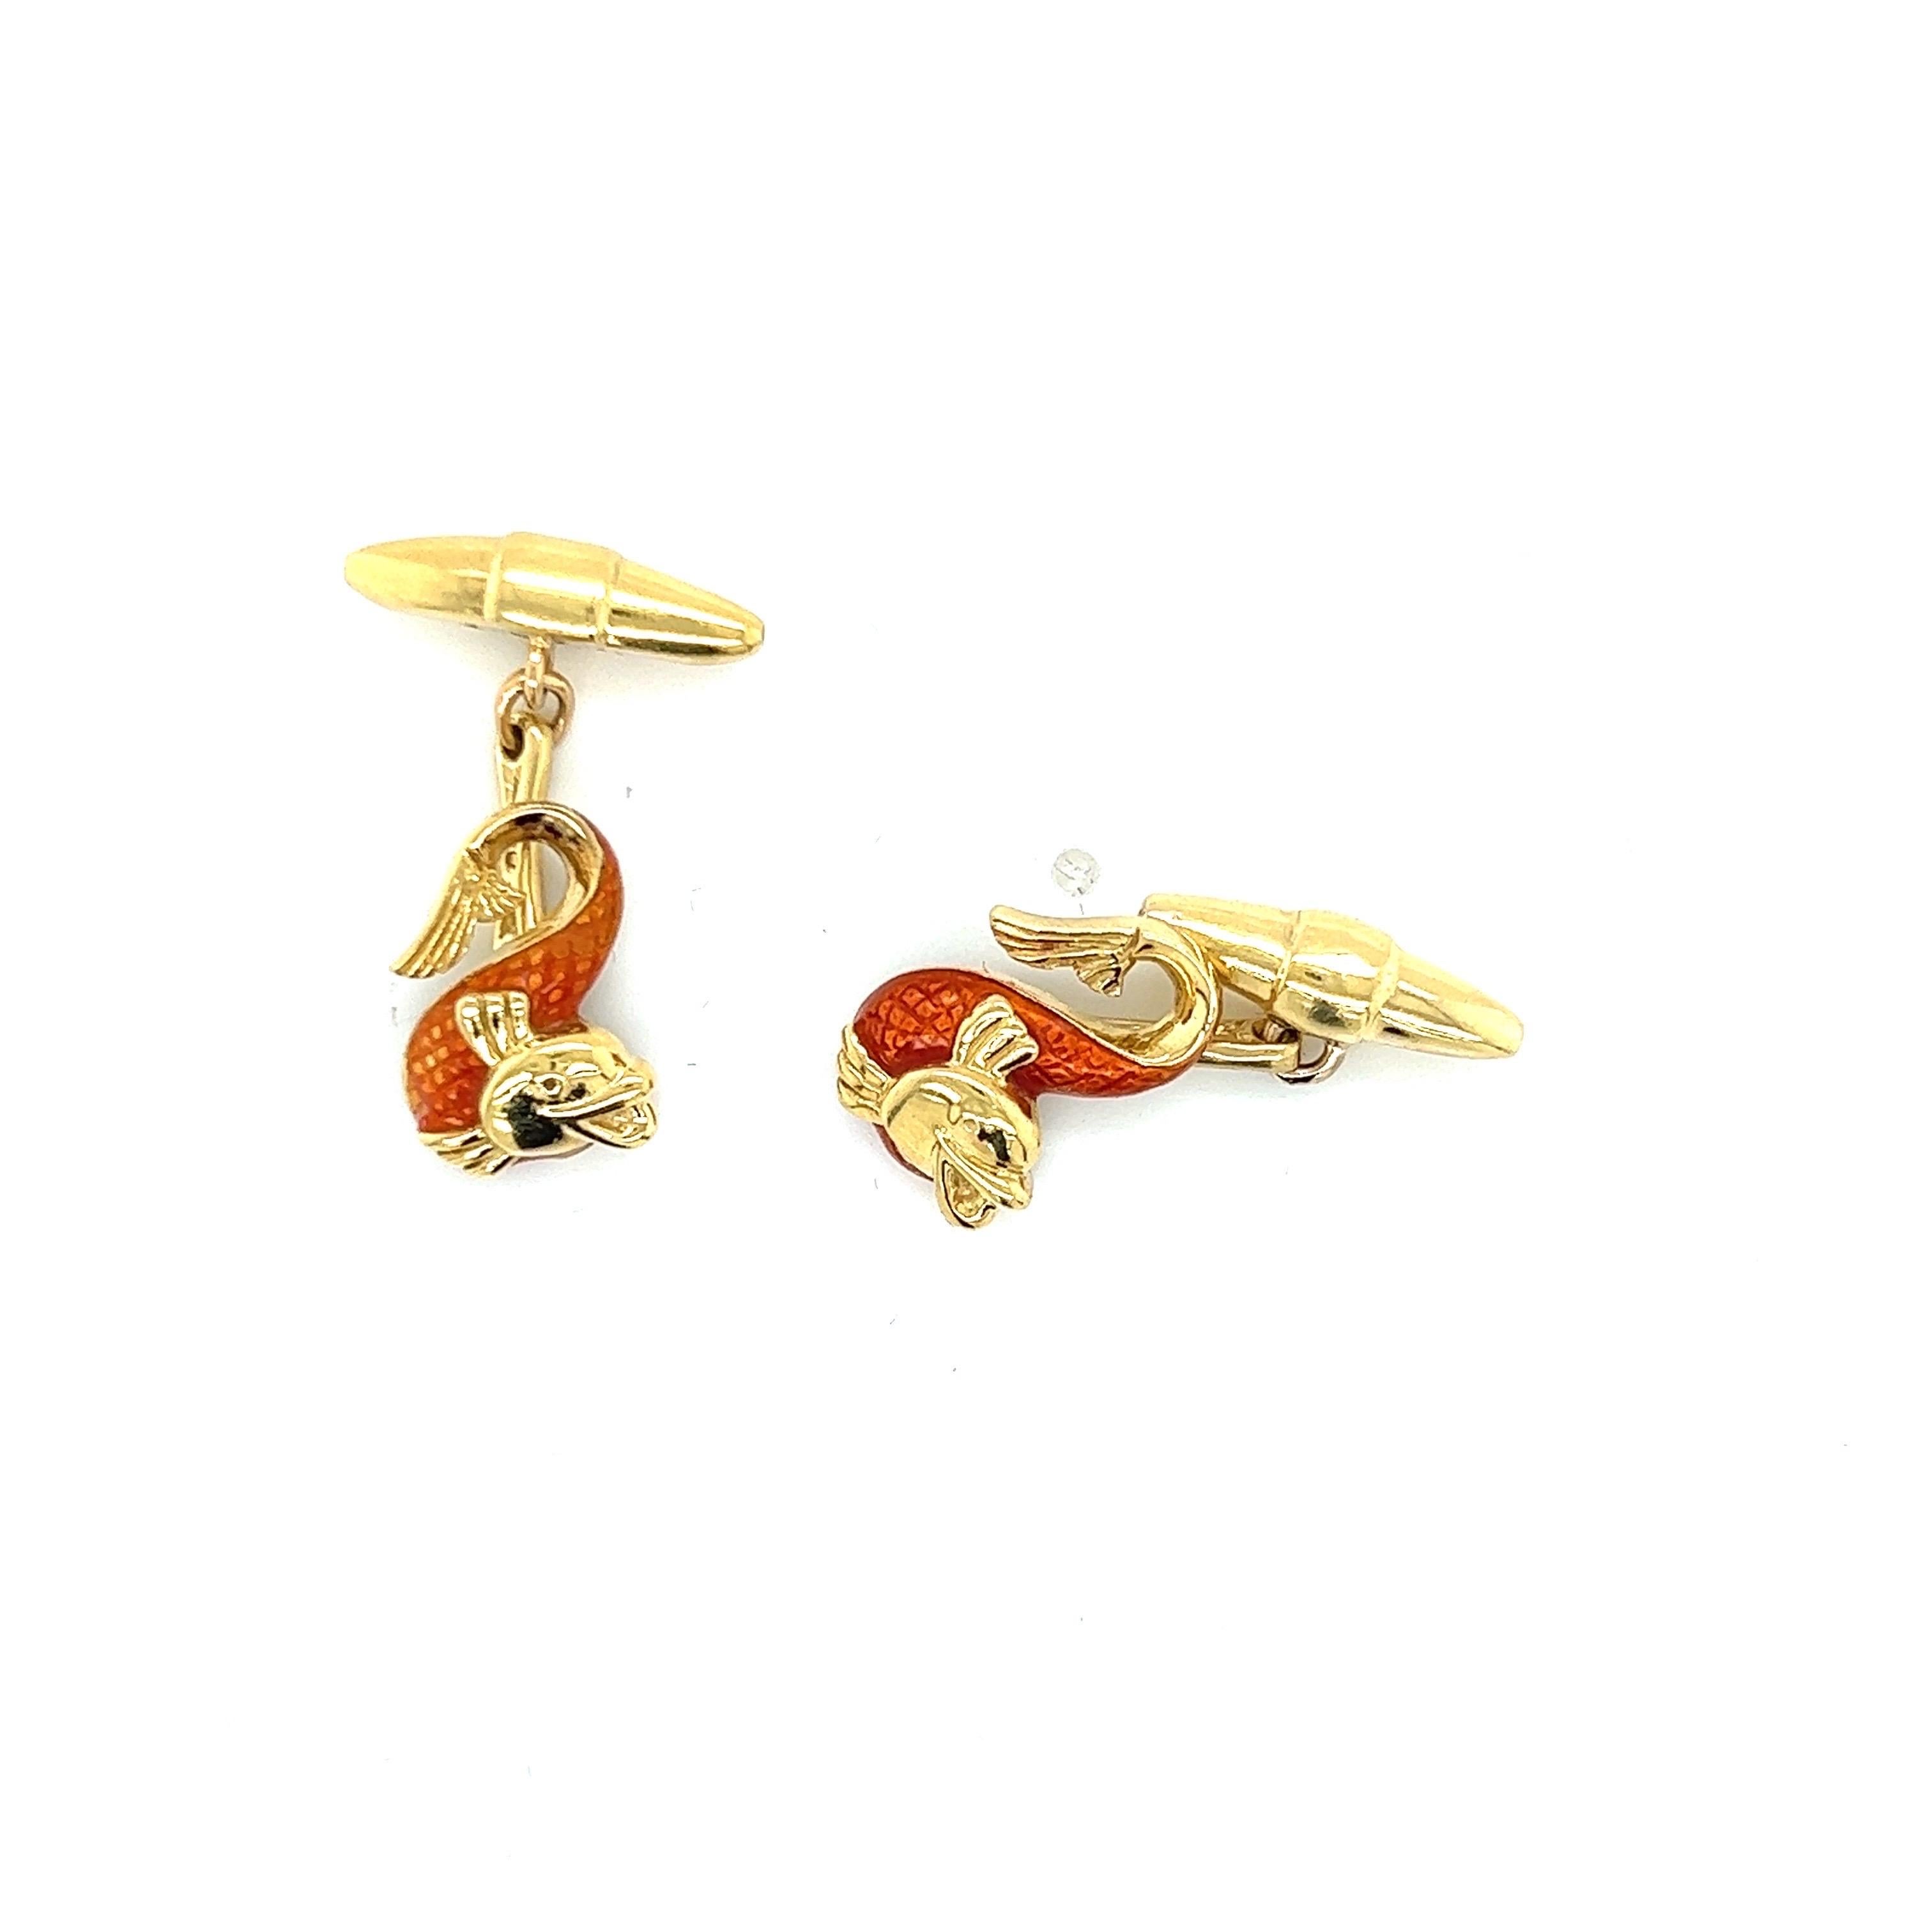 Orange Guilloche Enamel Fish Cufflinks in 18k Yellow Gold are a charming and whimsical accessory that add a pop of color and personality to any formal or semi-formal attire. The cufflinks feature a playful fish motif, with intricately detailed